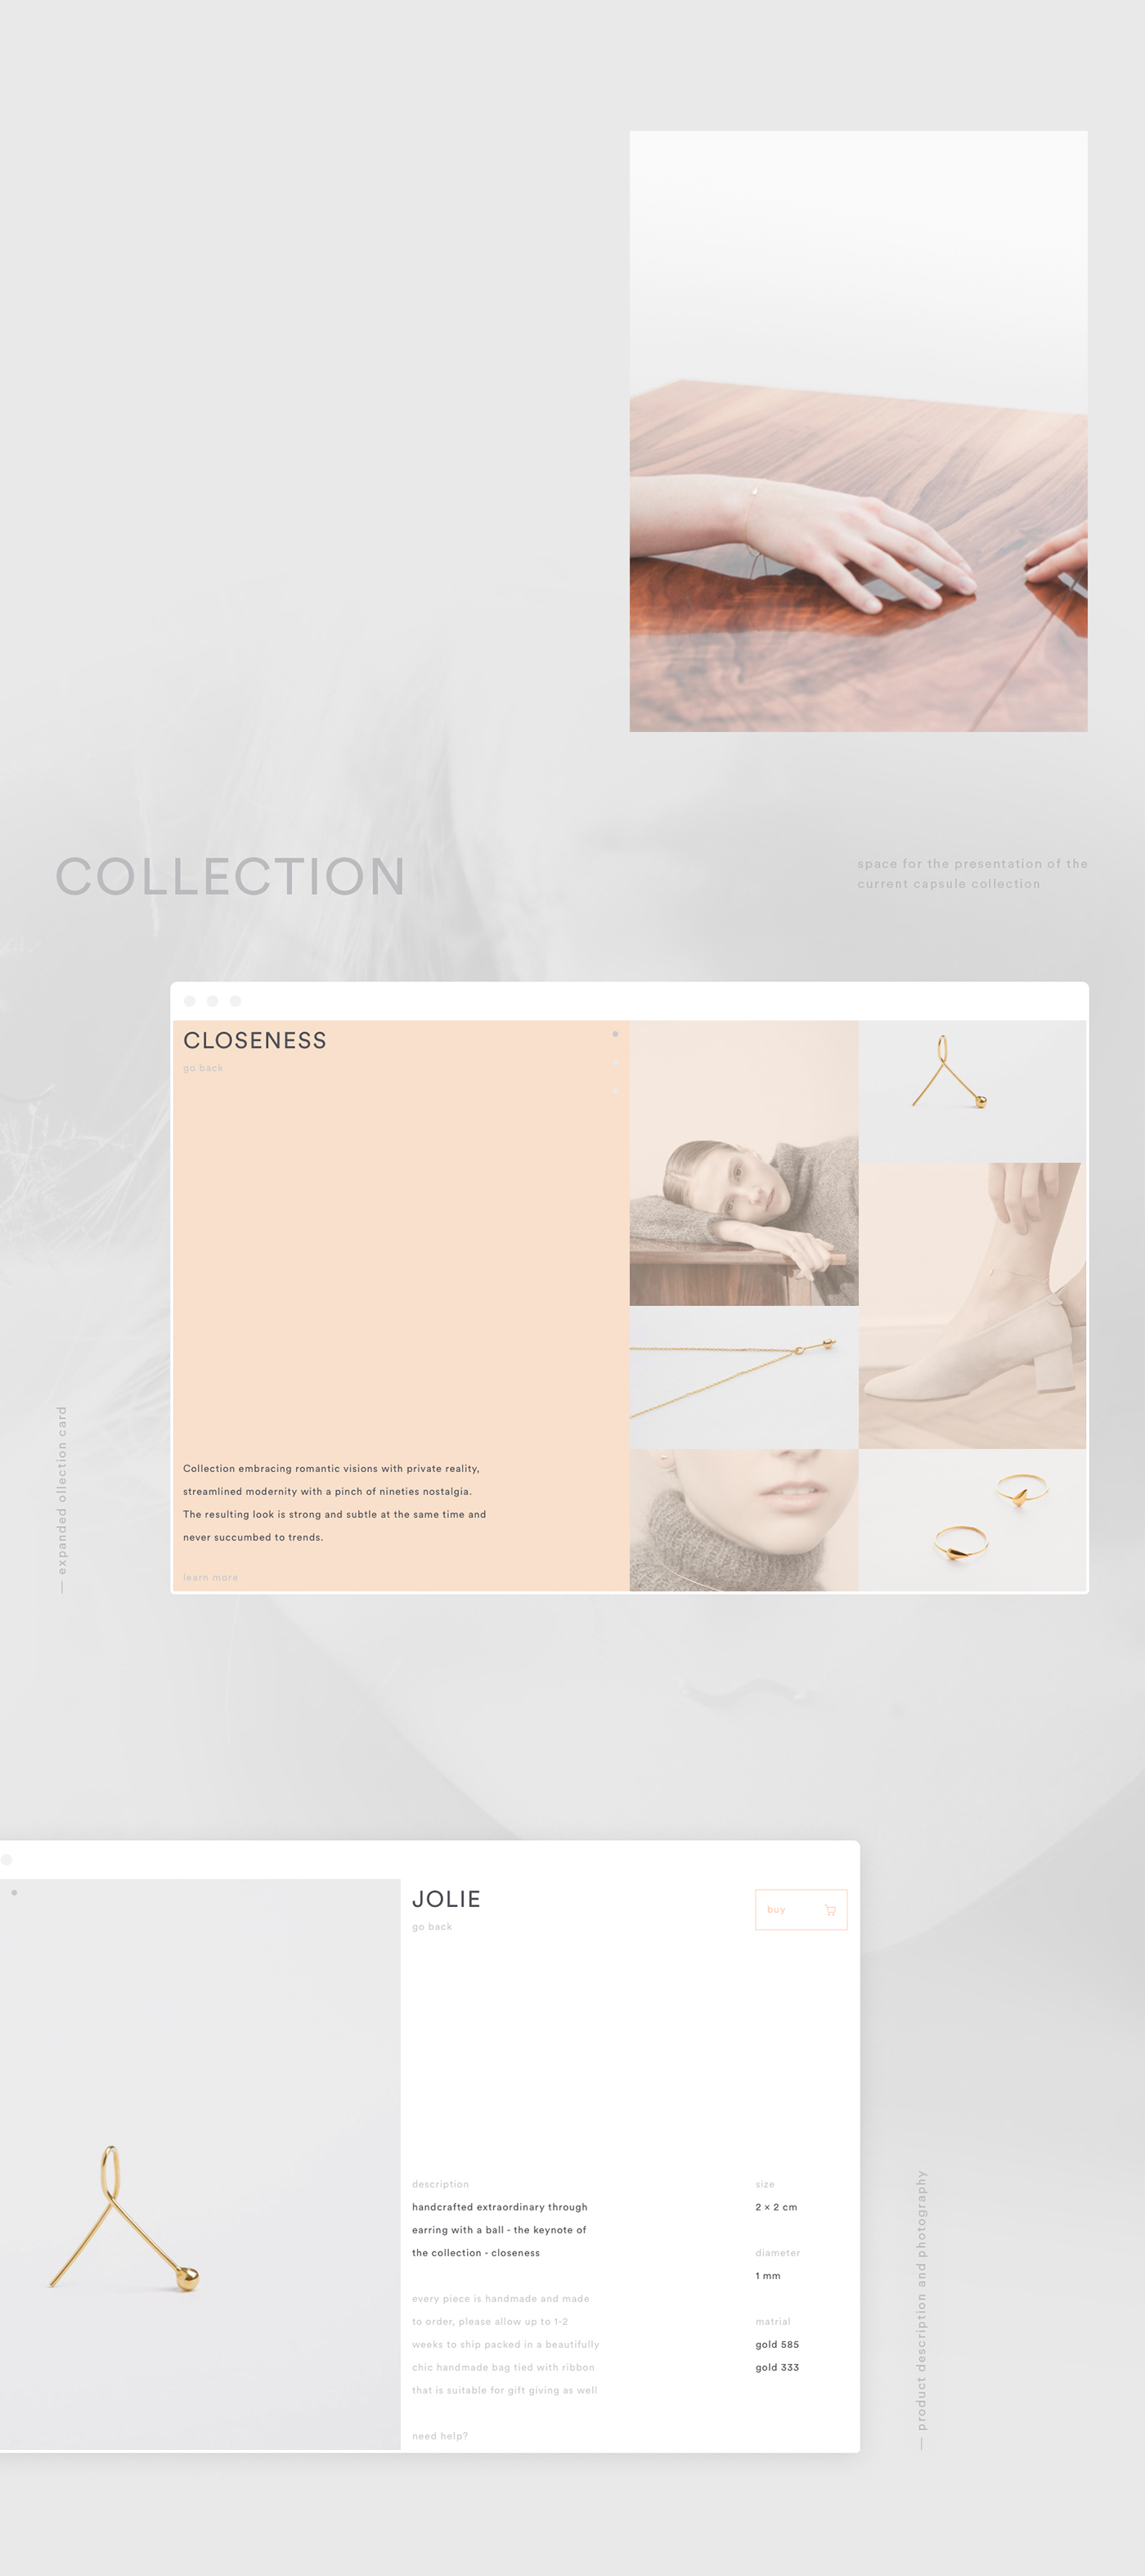 Jewellery jewelry gold store handcrafted nostalgia romantic Website simple cards